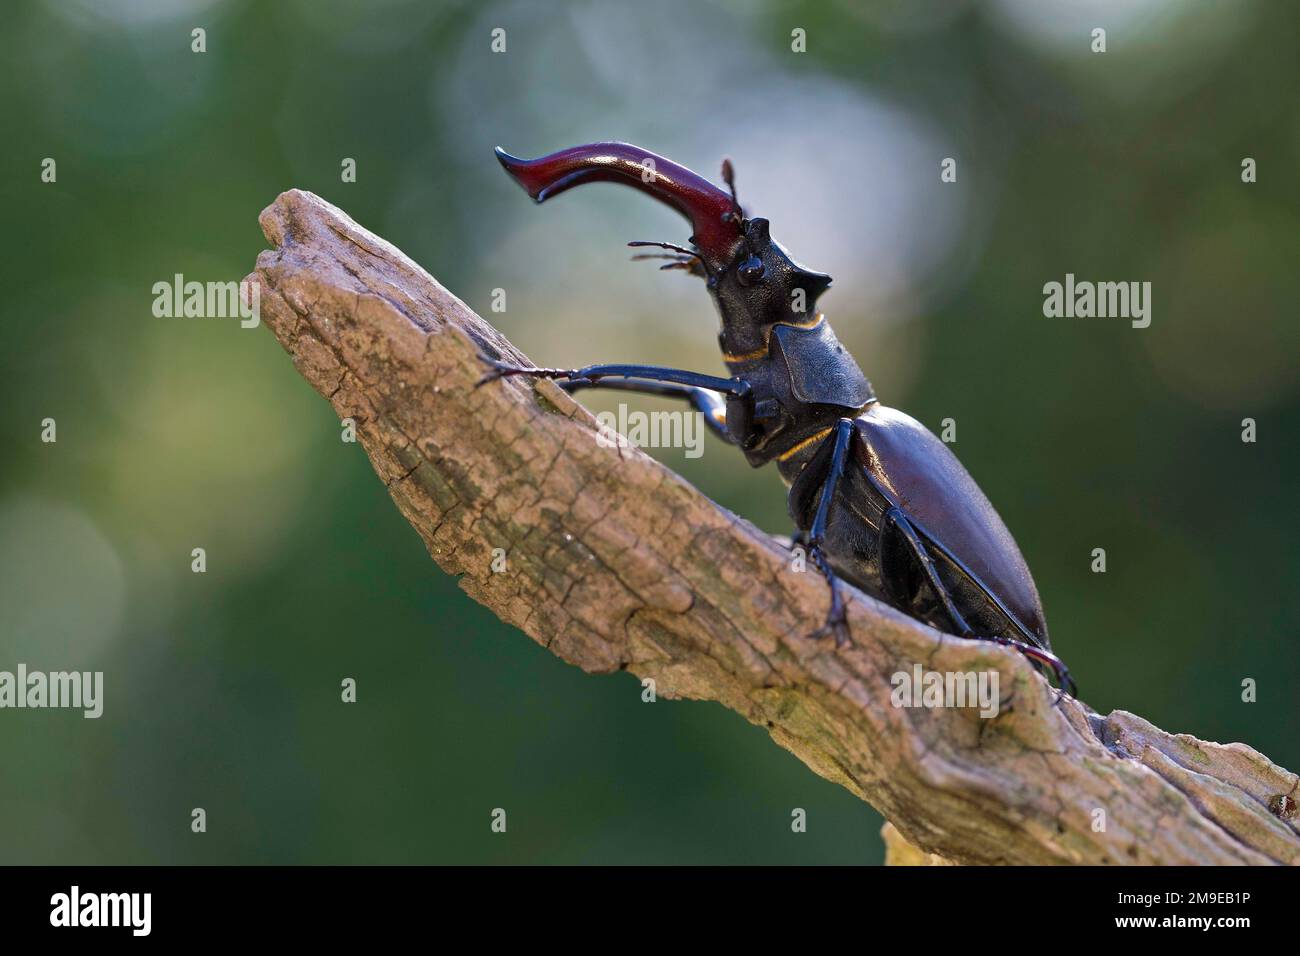 Stag beetle (Lucanus cervus), male with antler-like enlarged mandibles, largest and most conspicuous beetle in Europe, Thuringia, Germany Stock Photo